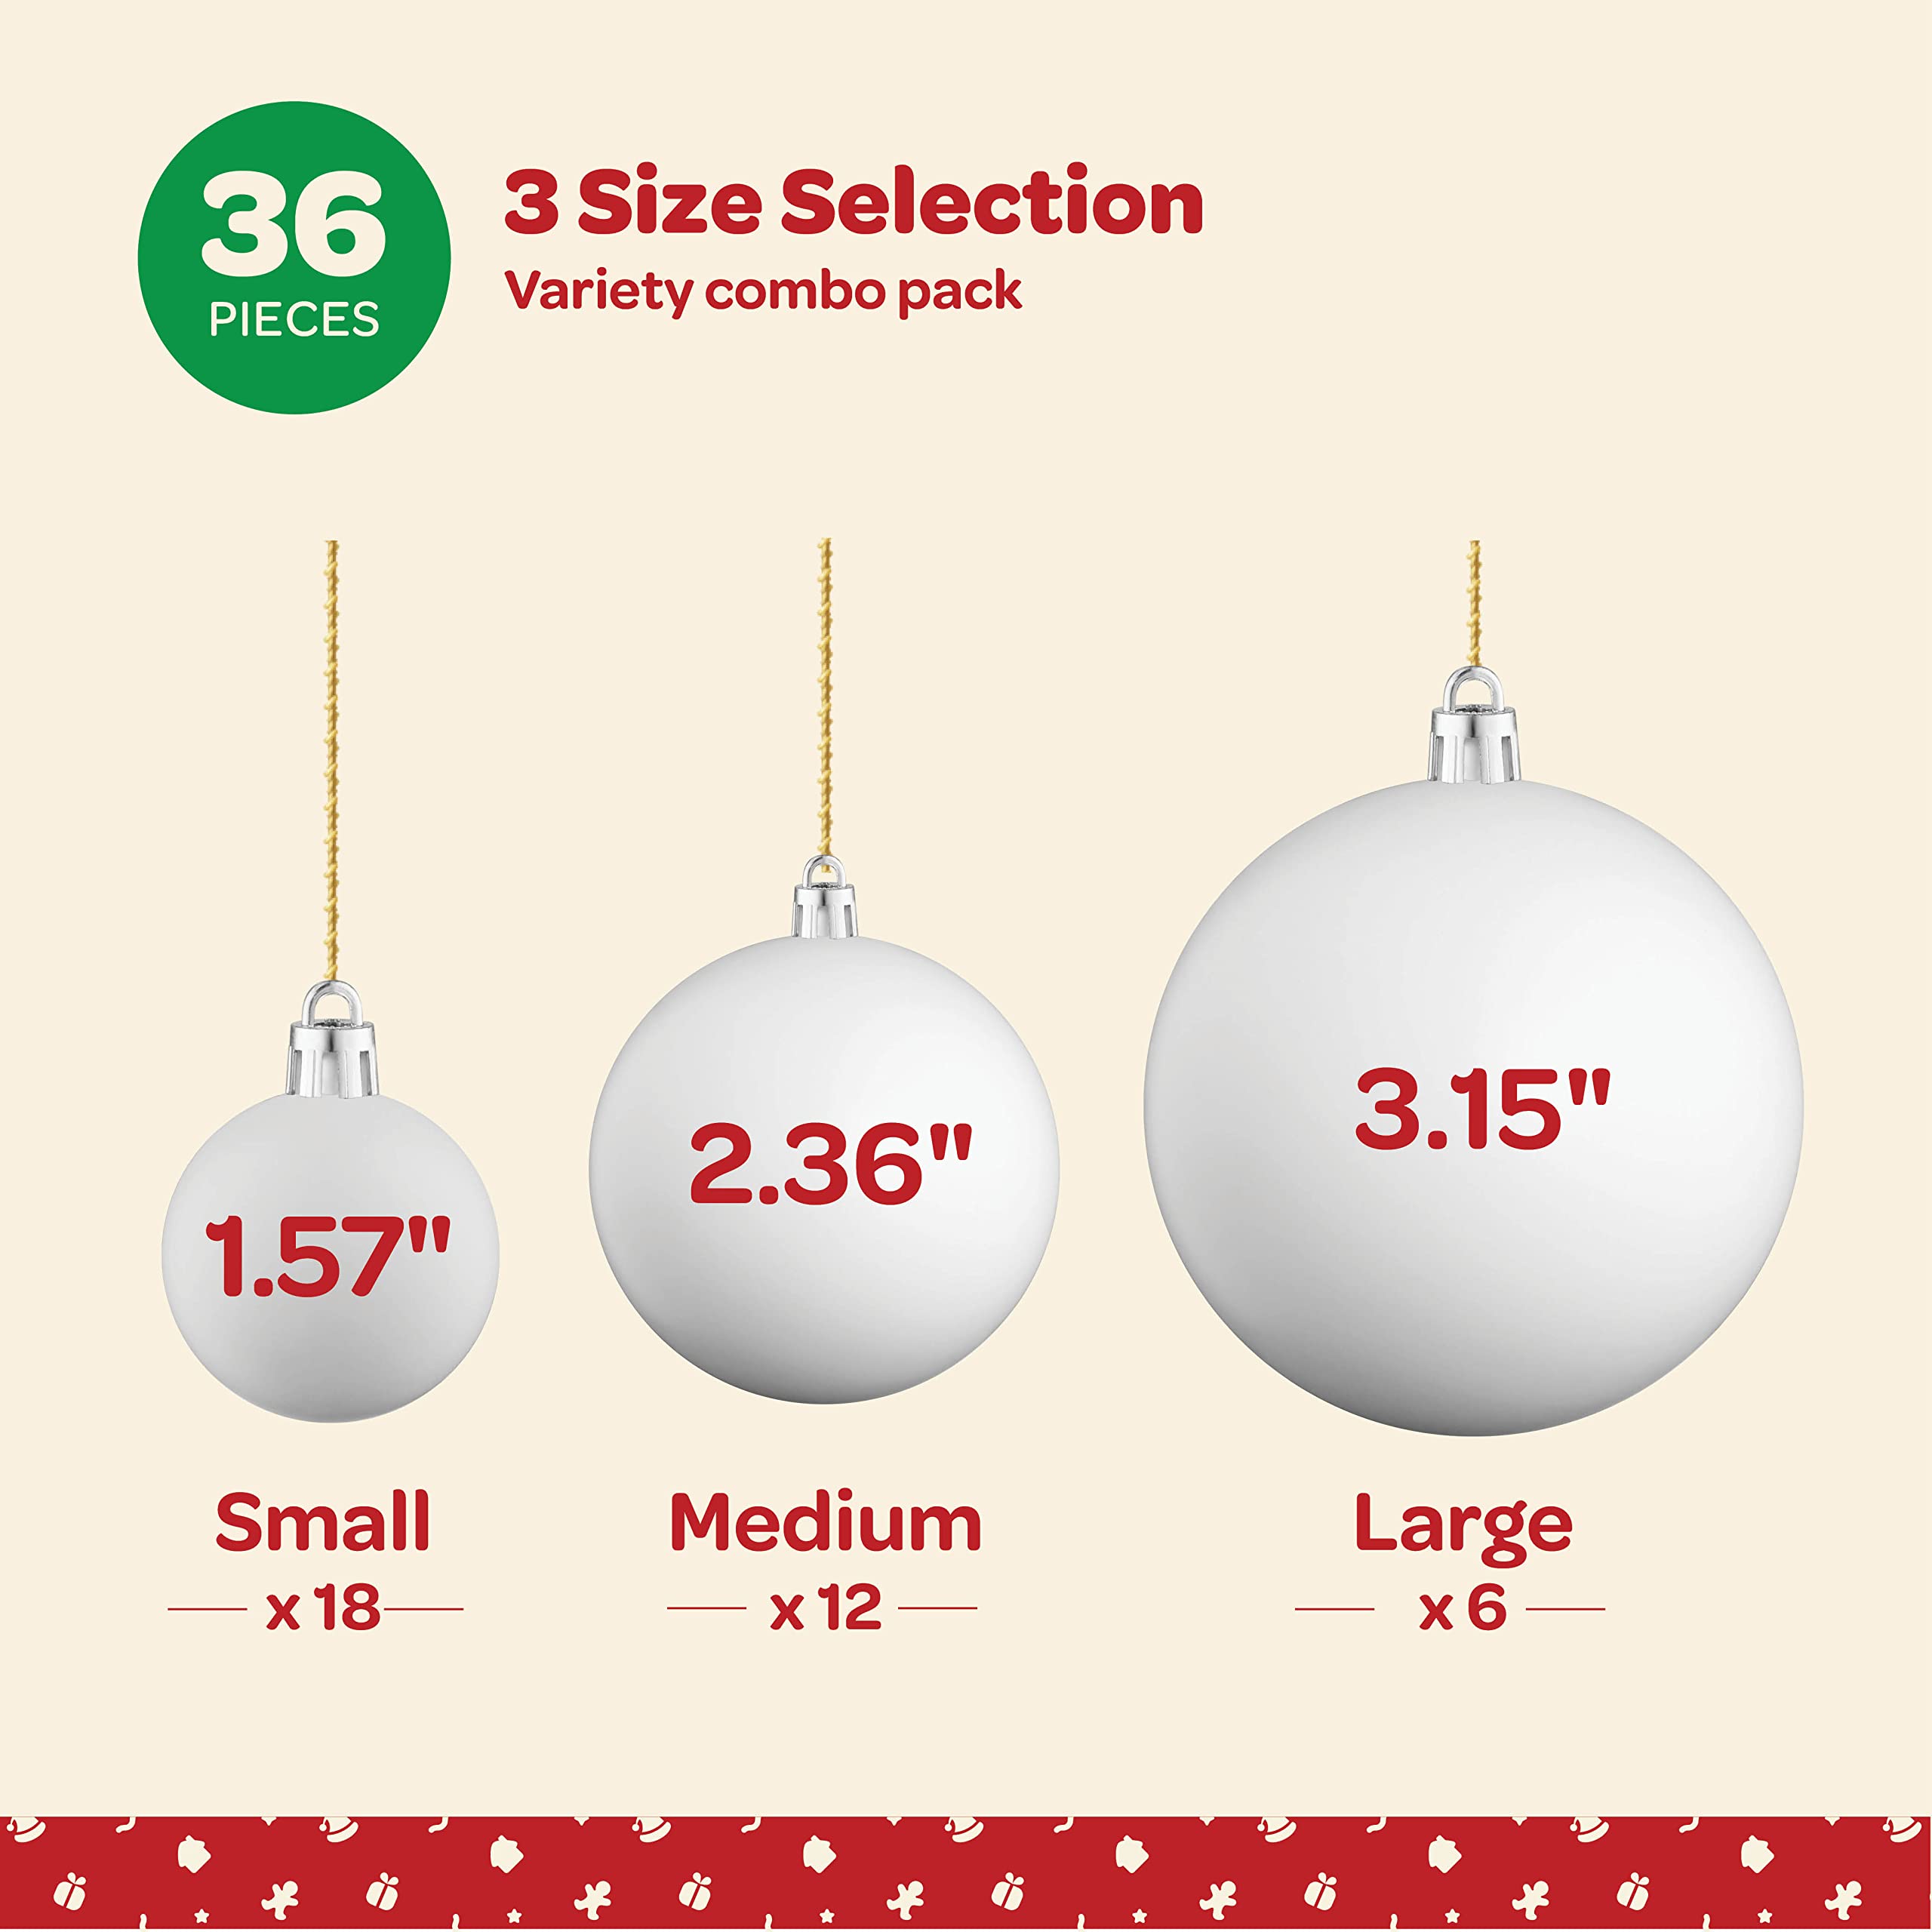 Christmas Ornaments Set of 36 - Beautiful [White] Christmas Tree Decorations Ornaments Set - 6 Style Christmas Ball Ornaments - Shatterproof/Pre-Strung - for Holiday/Party/Decorations/DIY